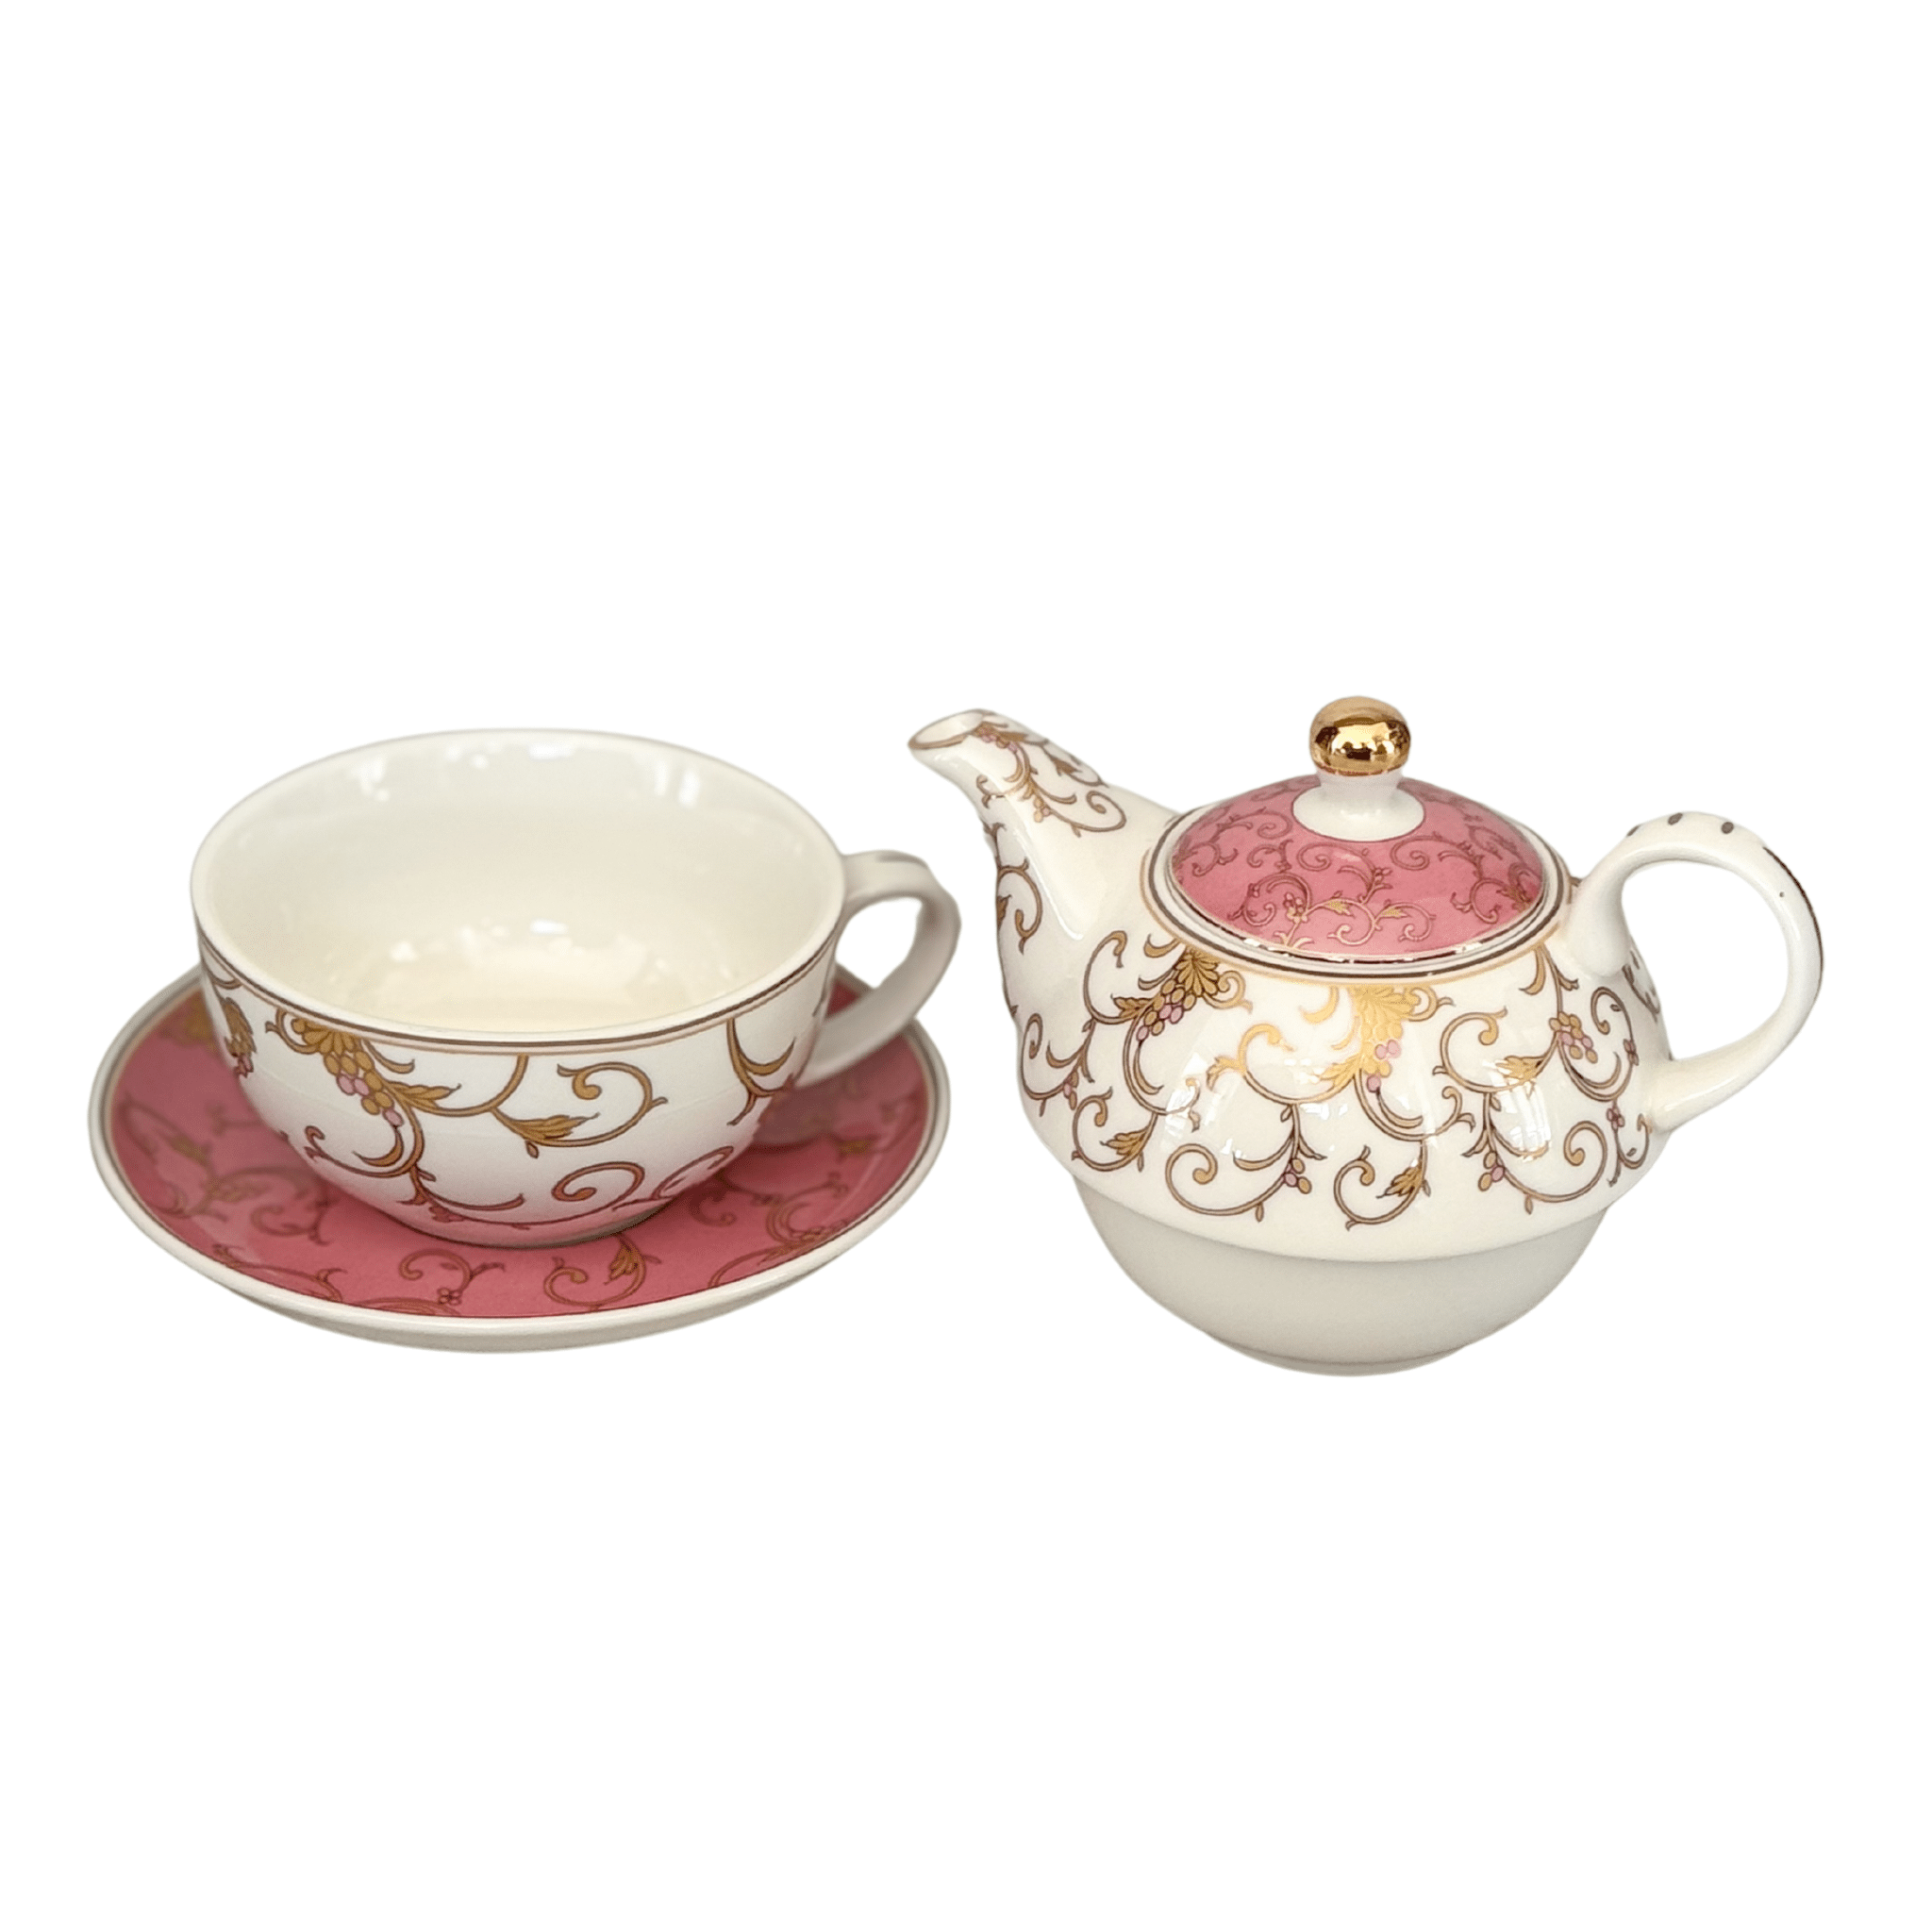 PINK & GOLD SCROLL TEA SET FOR ONE - FINE PORCELAIN - PLUME & WILLOW